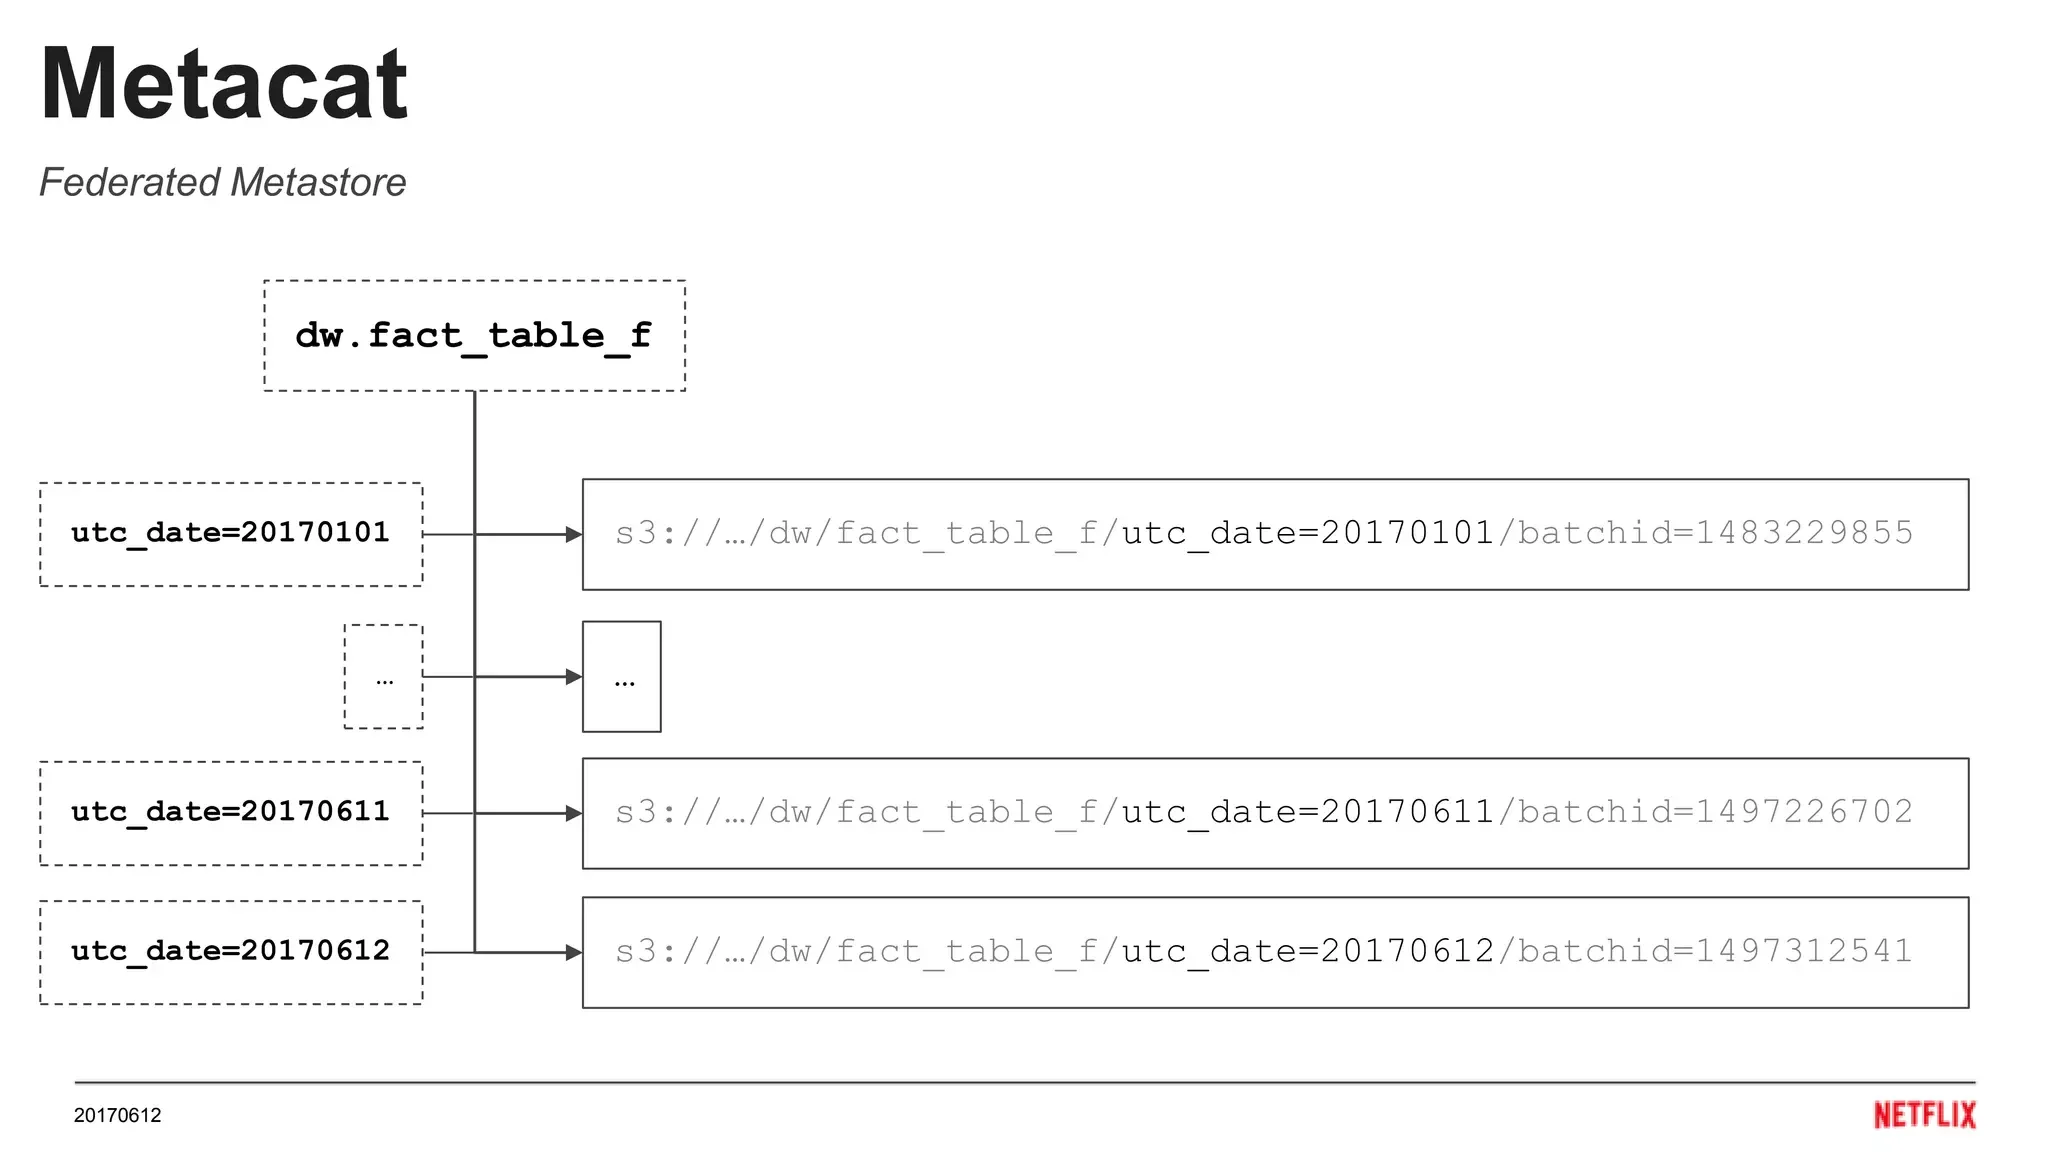 When working with dw.fact_table_f using Metacat, users can query and manage metadata from this fact table regardless of the underlying data store